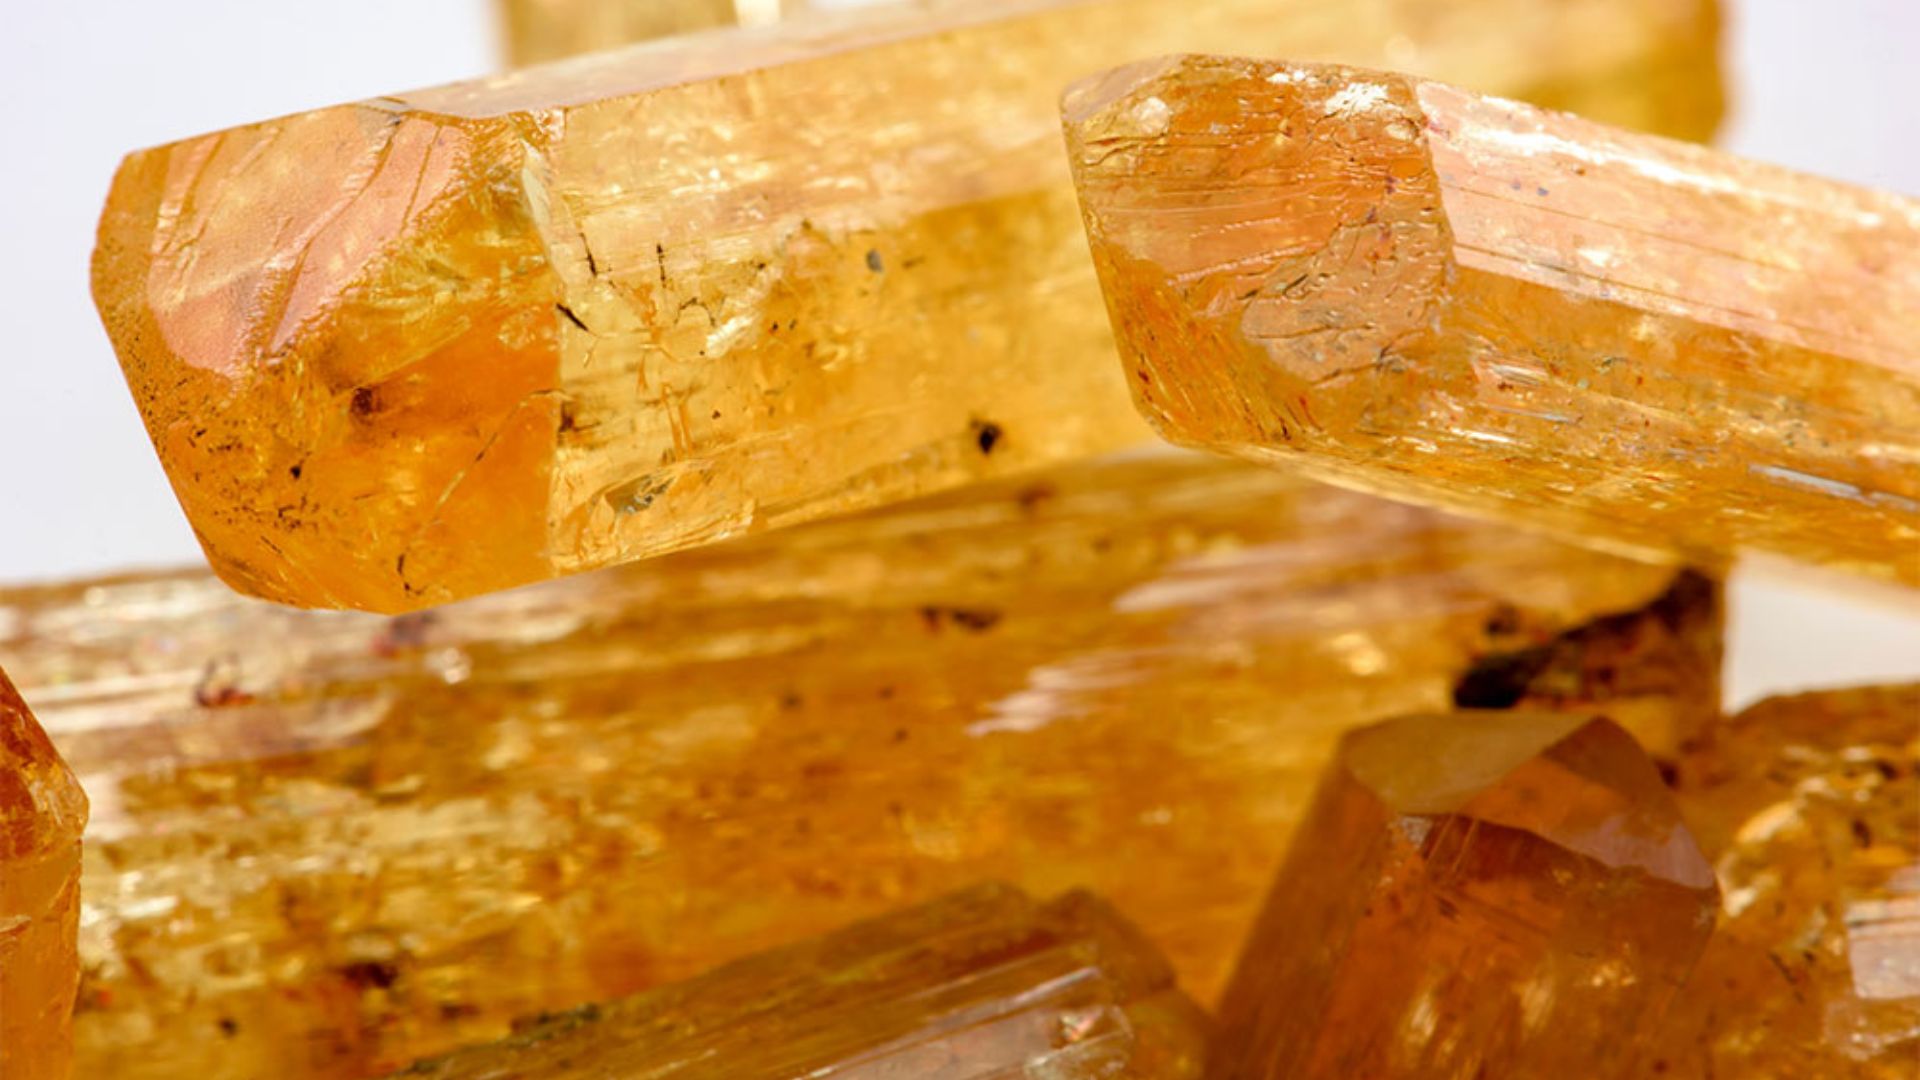 Topaz Meaning And Uses - A Stunning Gemstone With Healing Properties